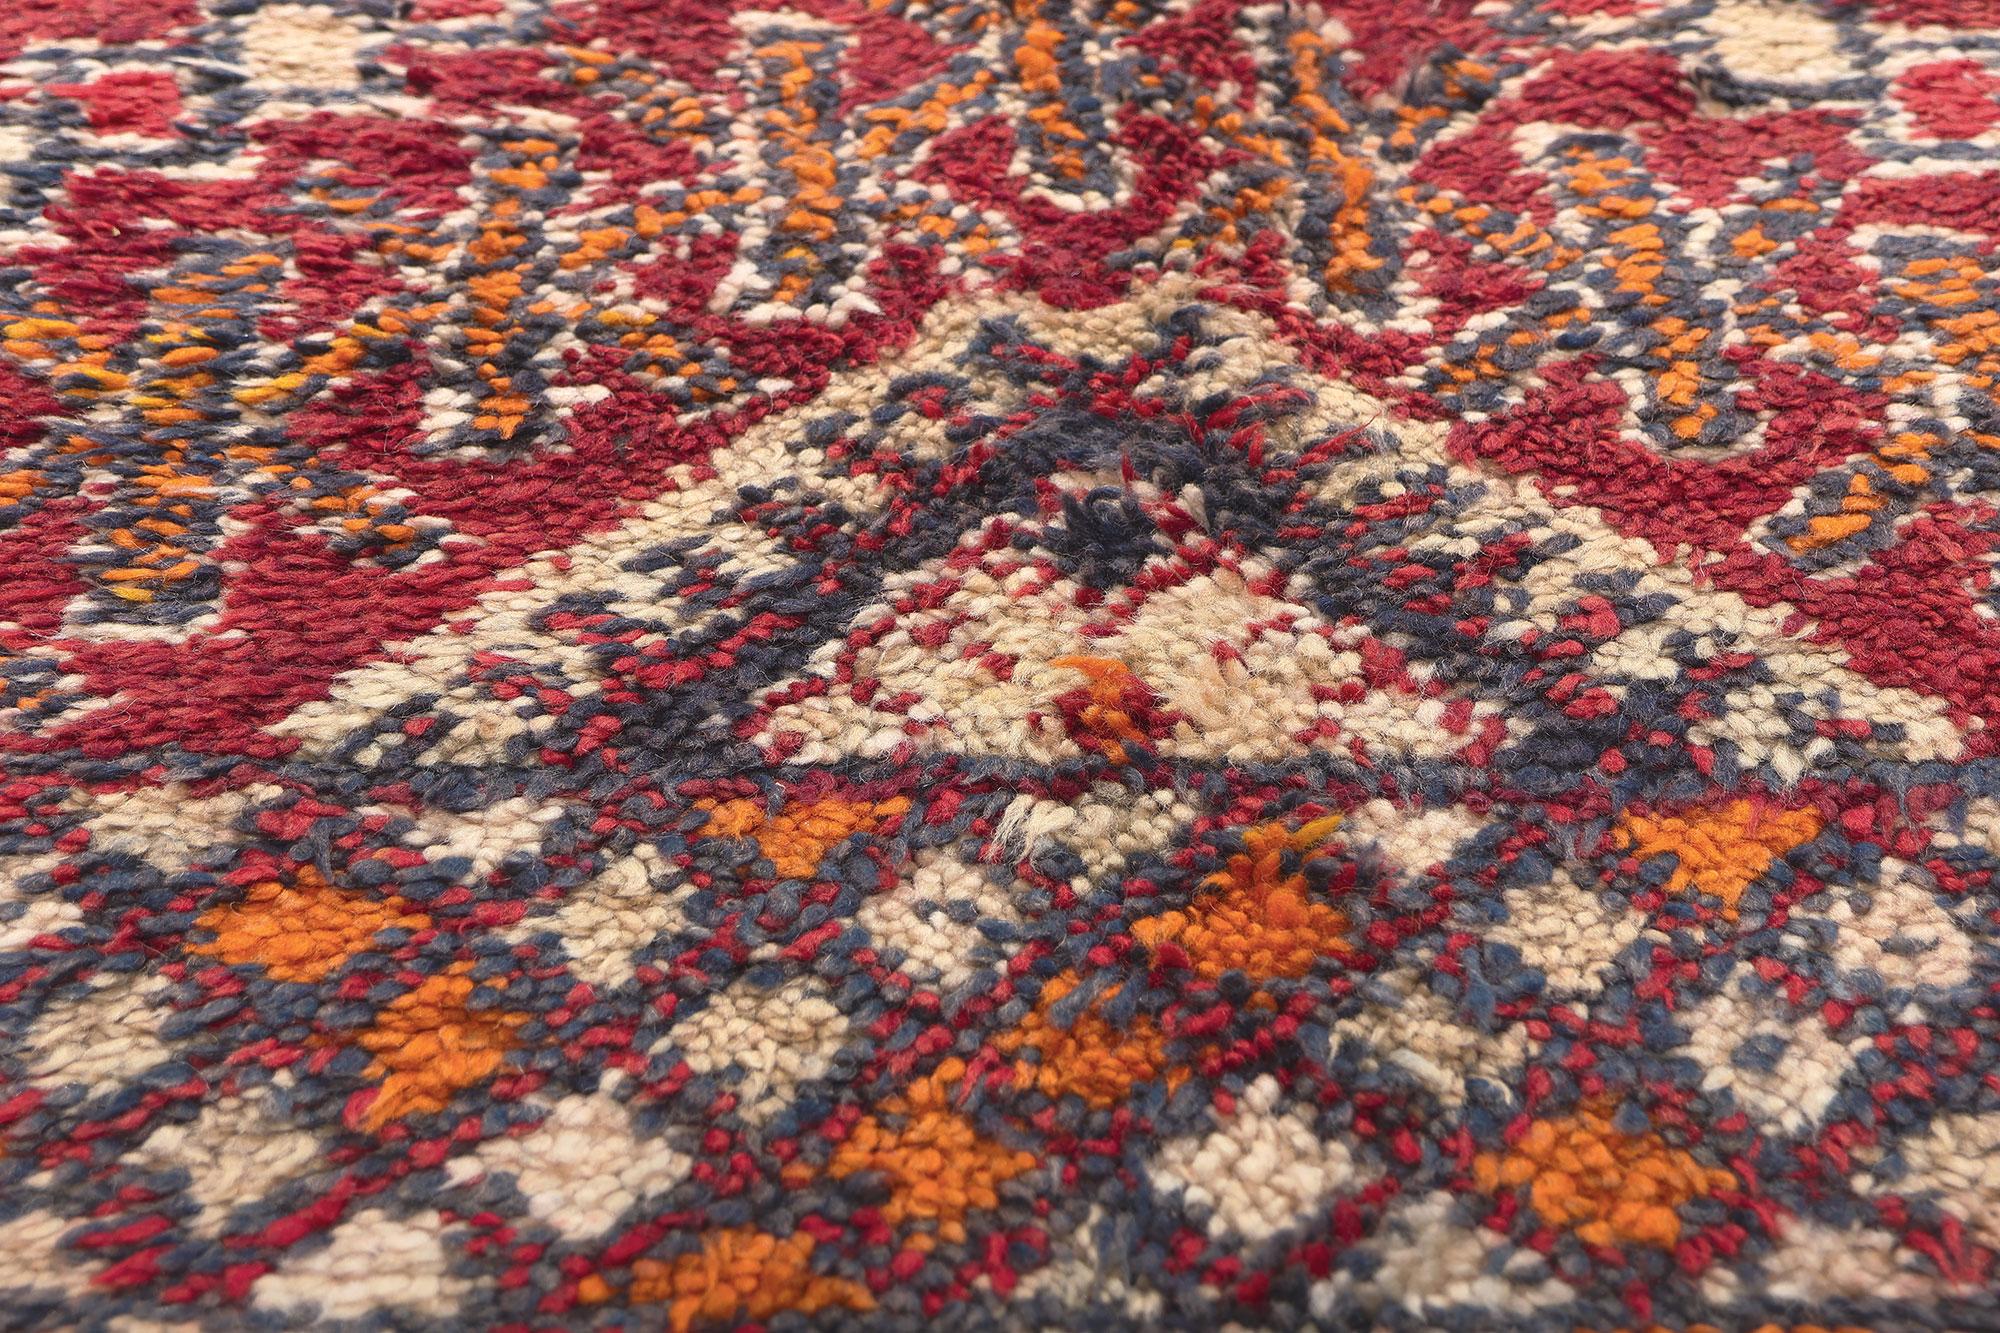 Vintage Beni MGuild Moroccan Rug, Tribal Enchantment Meets Midcentury Modern In Good Condition For Sale In Dallas, TX